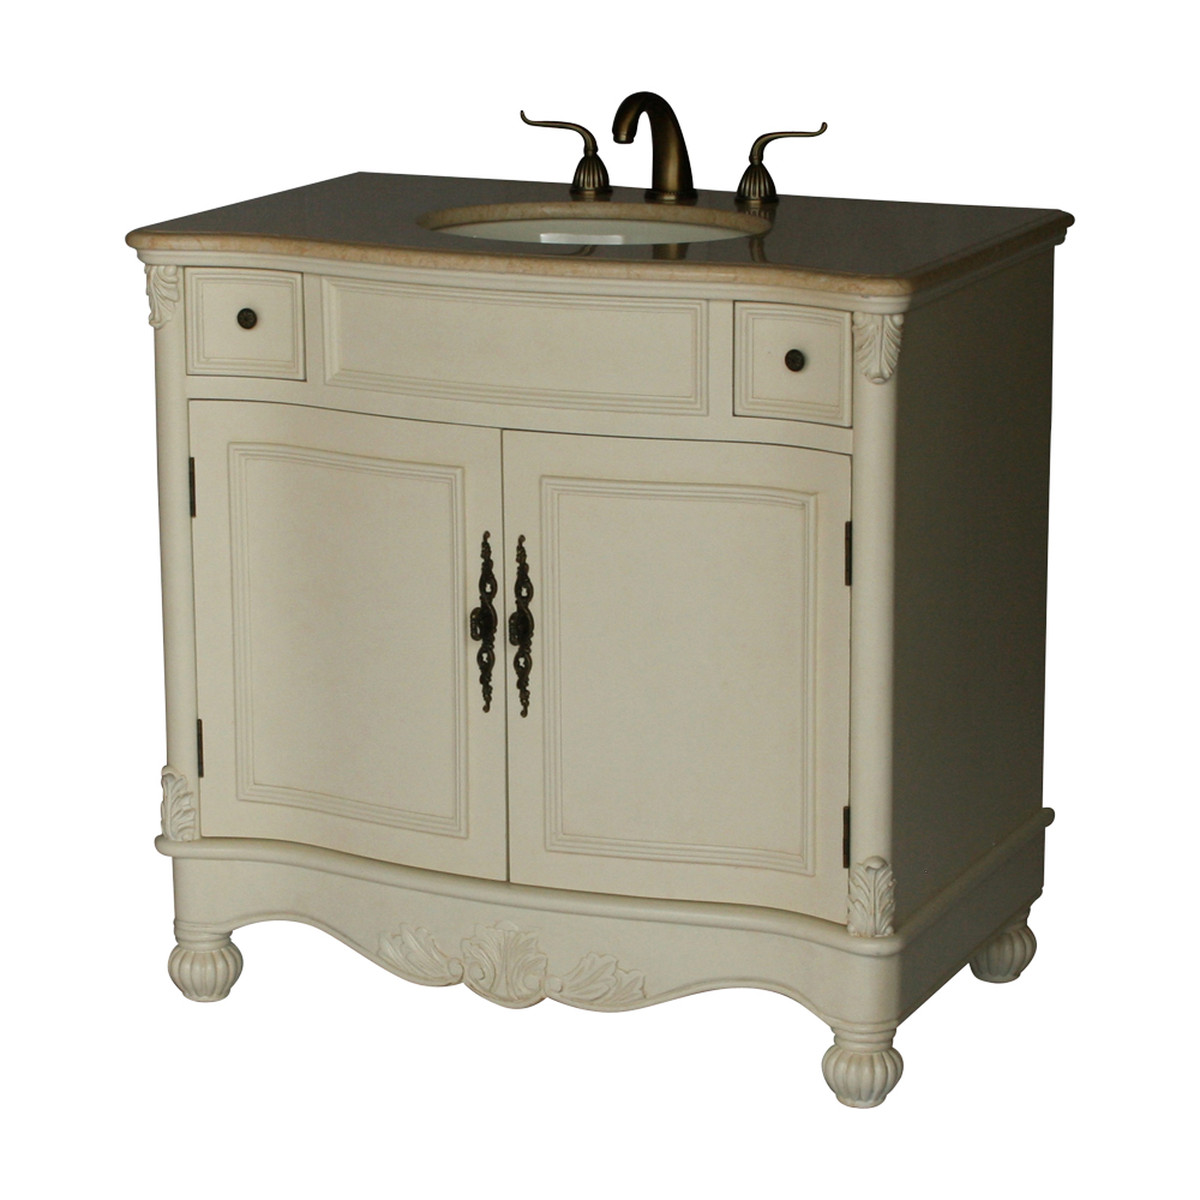 36" Adelina Antique Style Single Sink Bathroom Vanity with Beige Stone Countertop and Antique White Finish